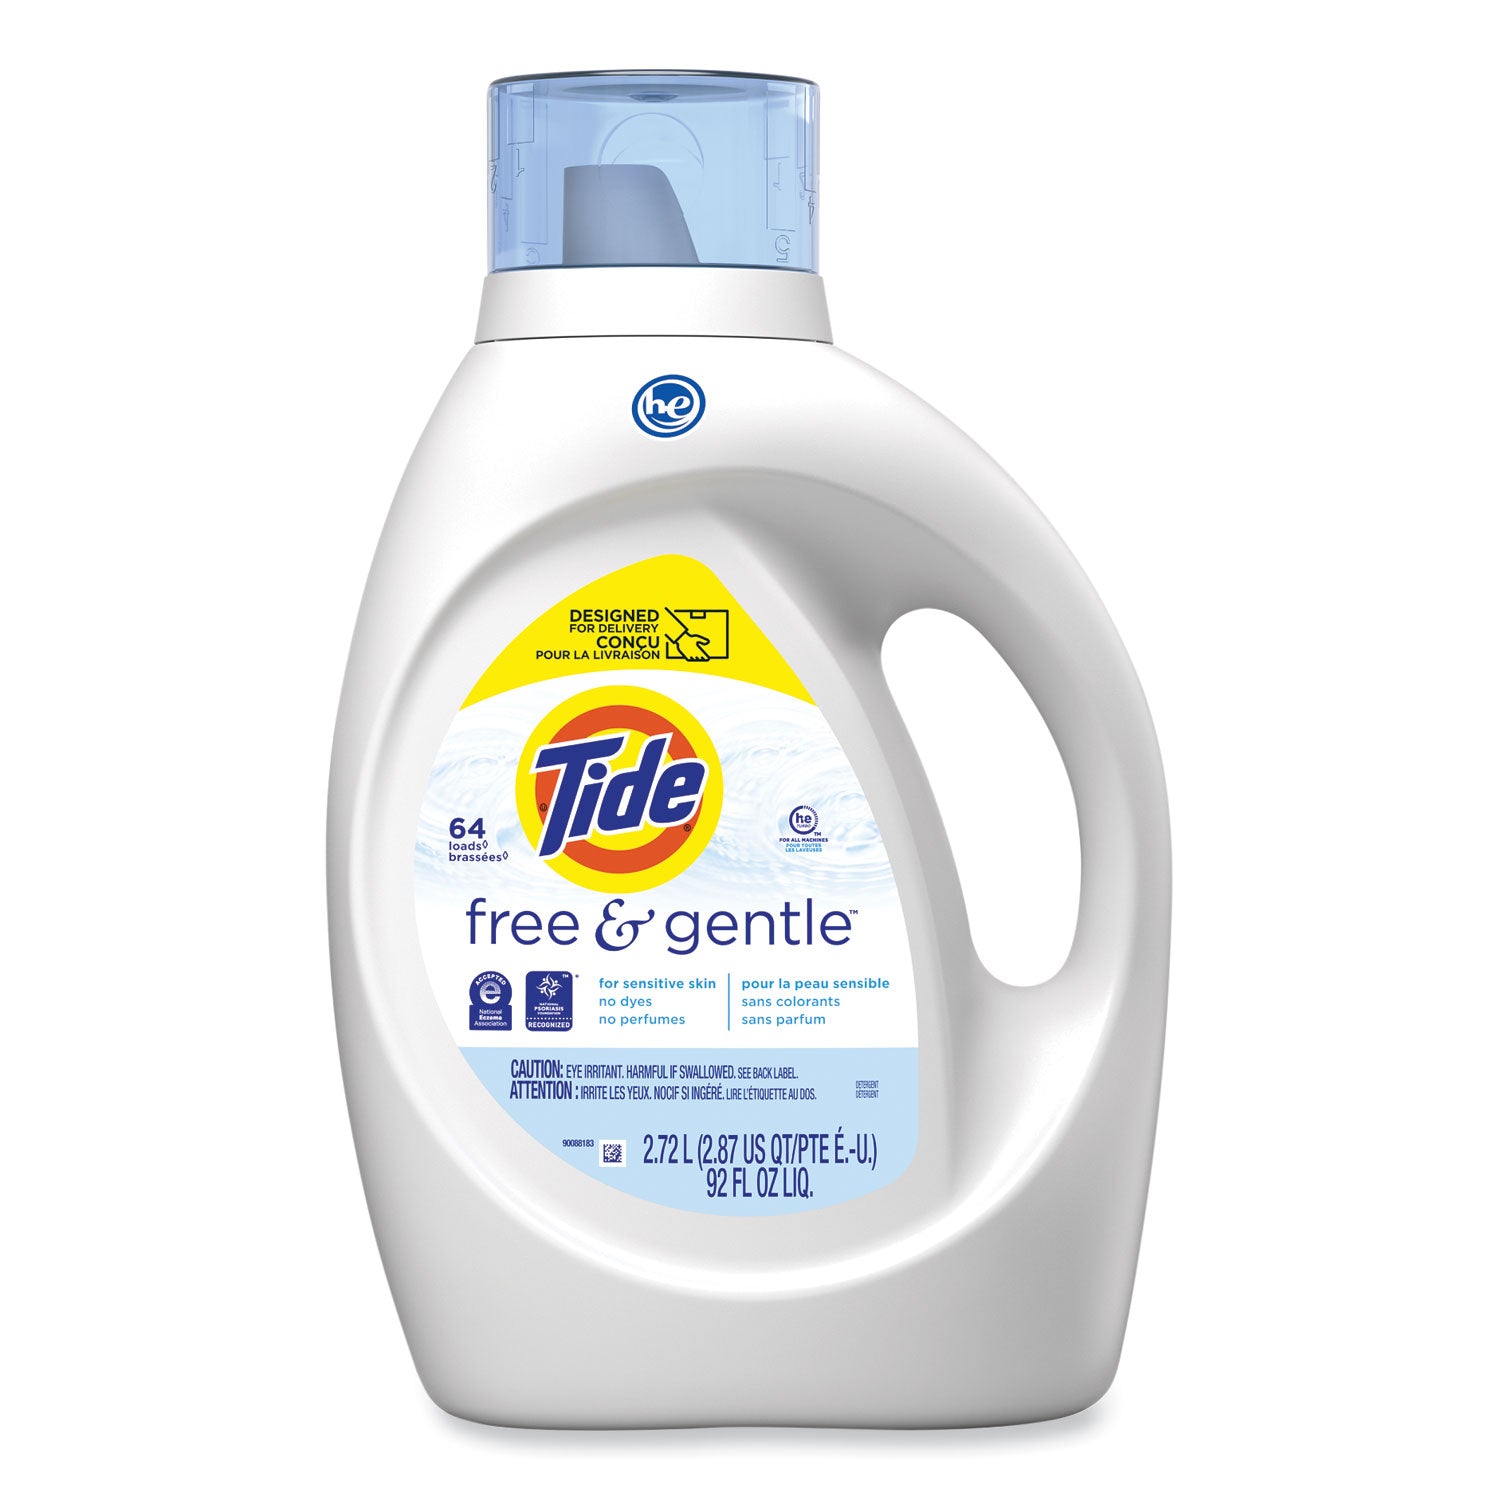 free-and-gentle-liquid-laundry-detergent-unscented-92-oz-bottle_pgc48871 - 1